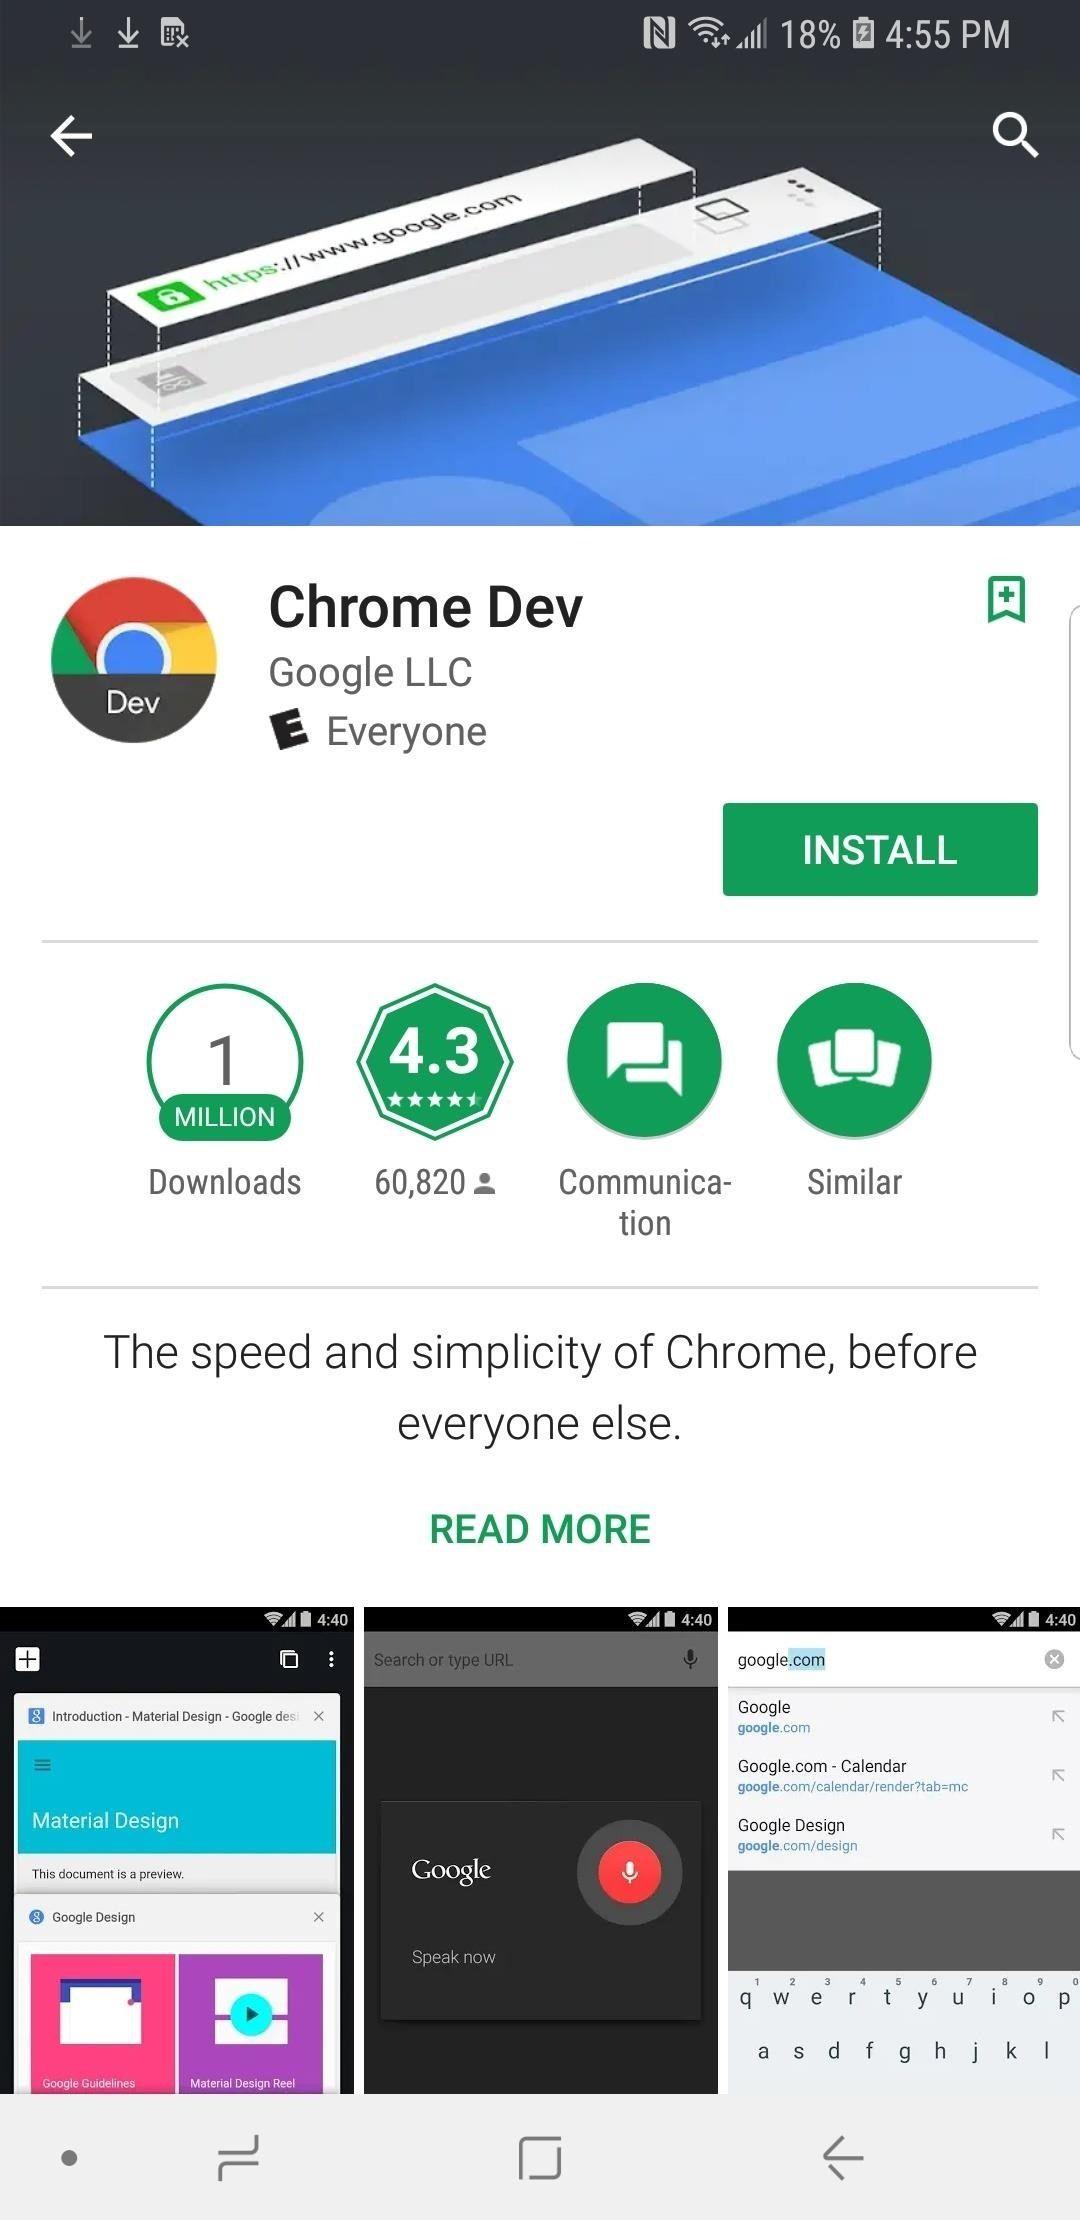 Browser N Logo - Google Chrome 101: How to Install the Beta Browser on iPhone